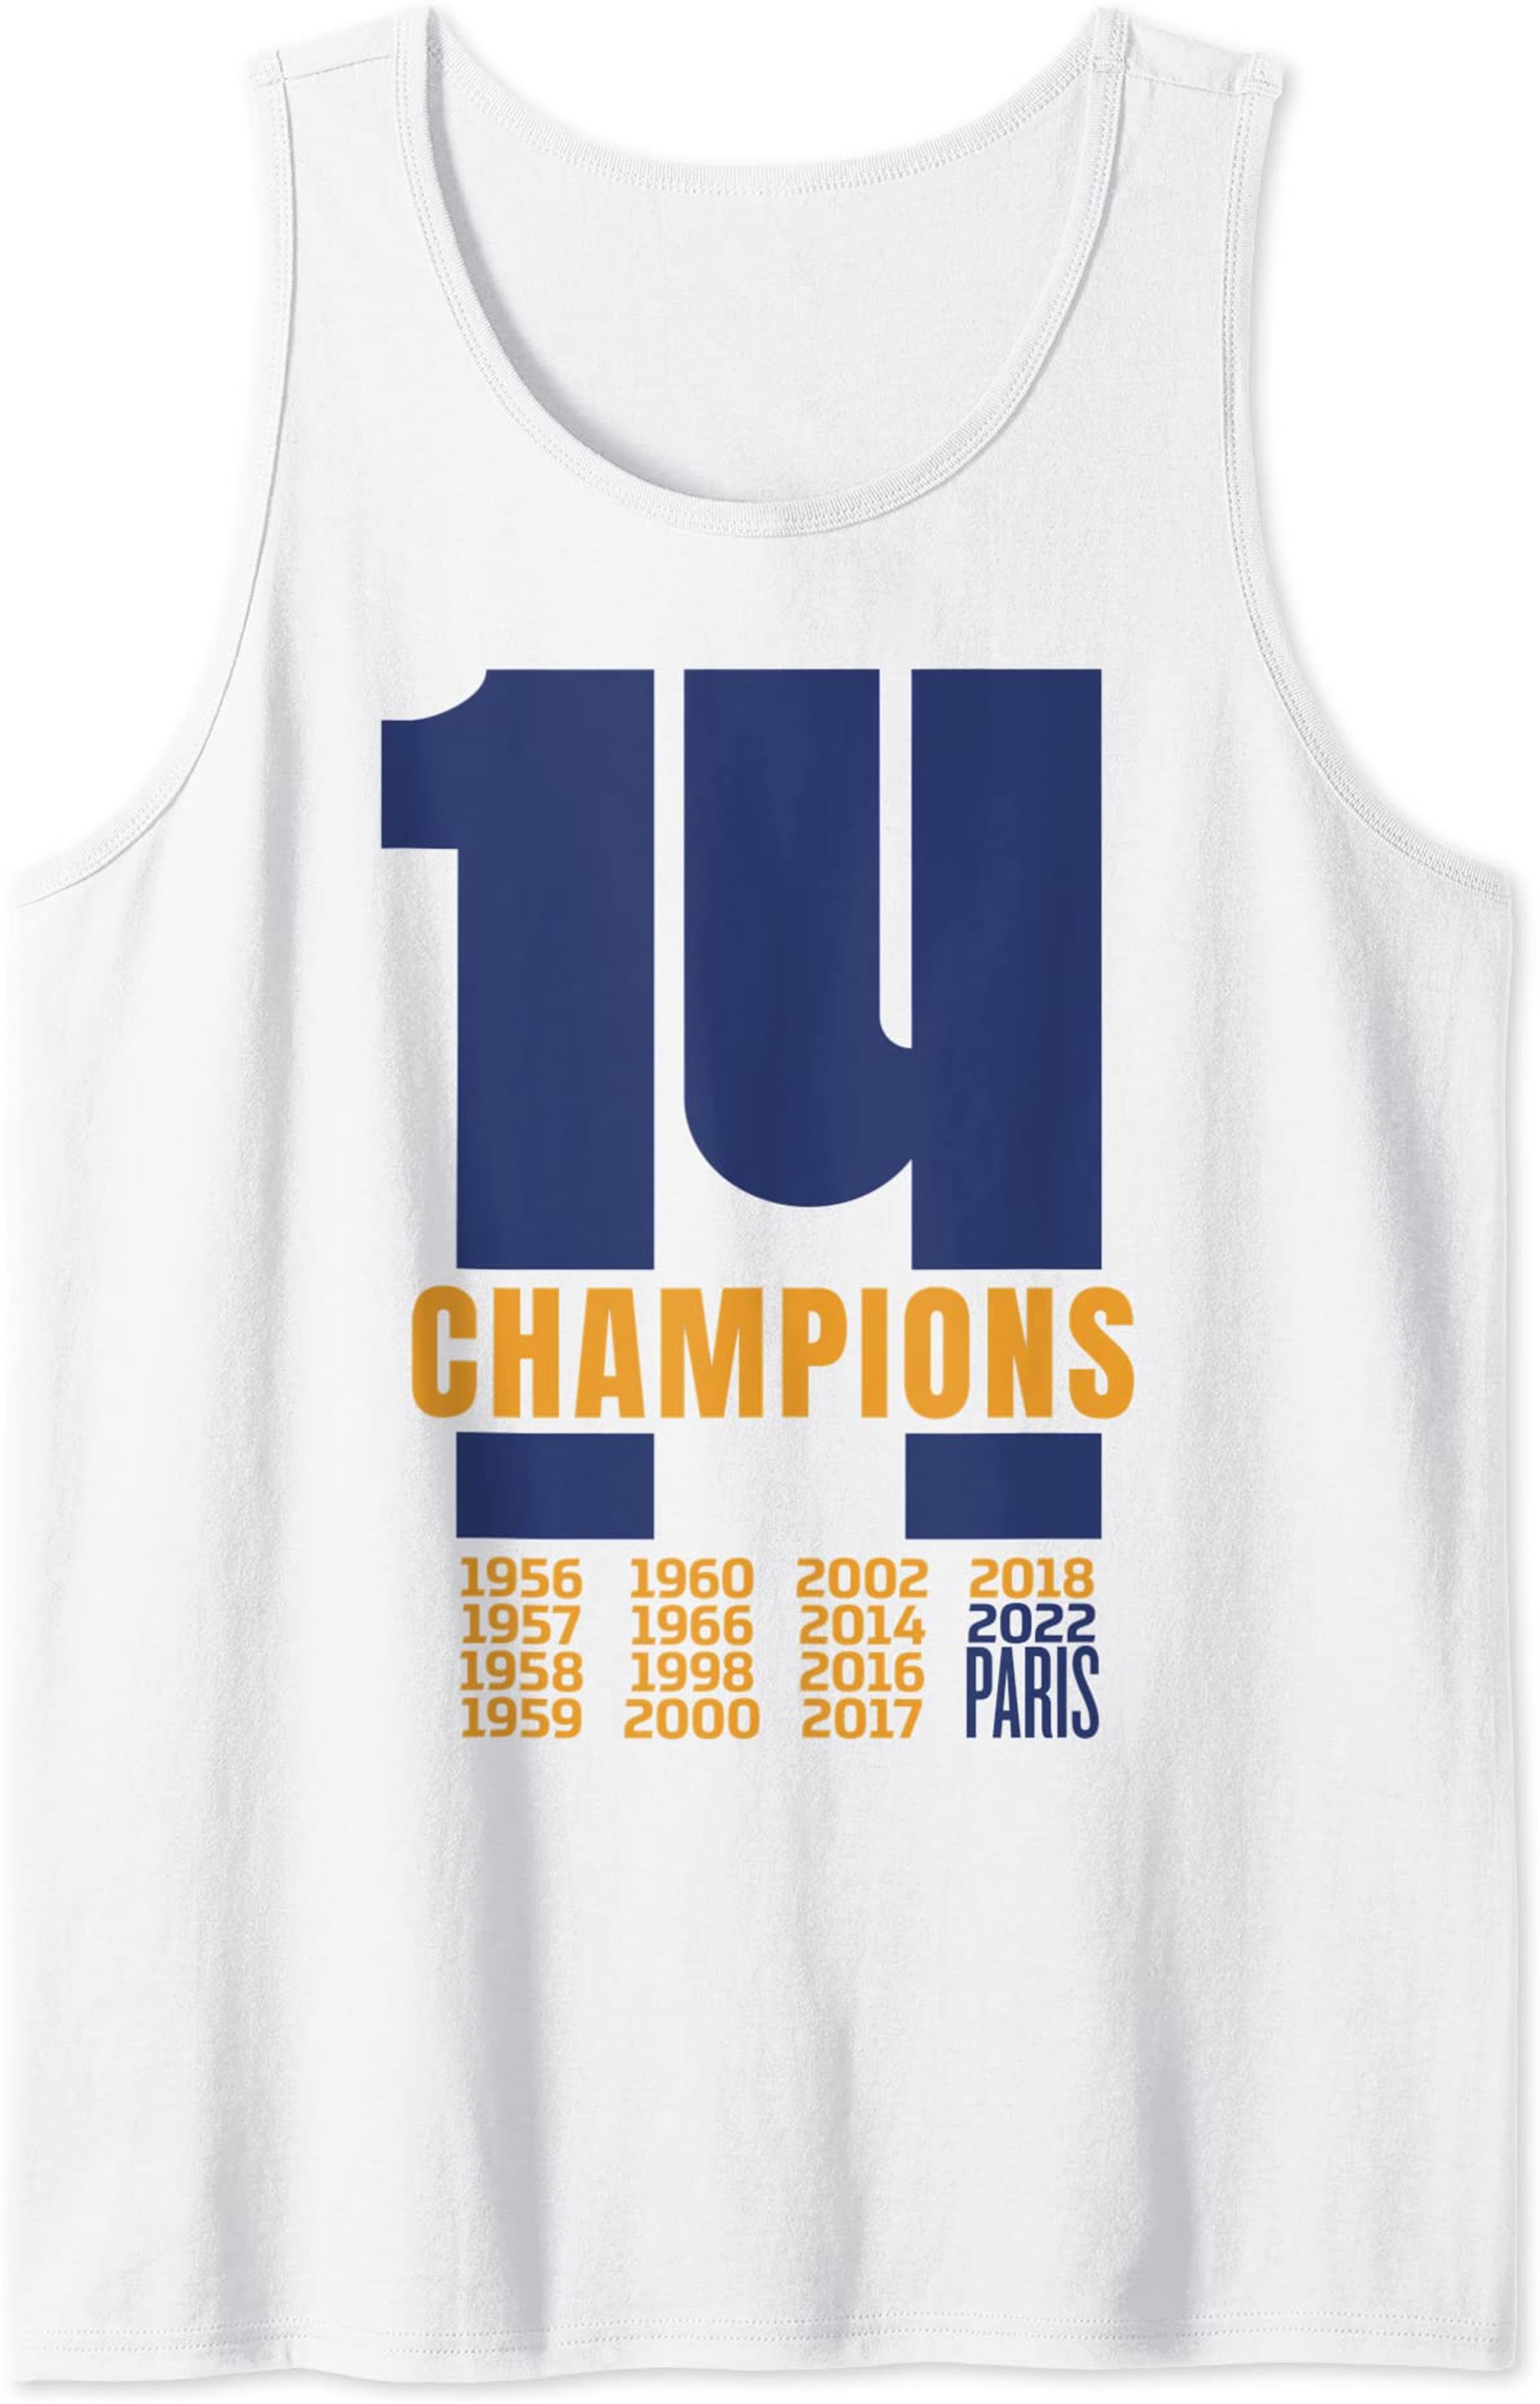 Madrid Champions 2022 Tank Top Full Size Up To 5xl